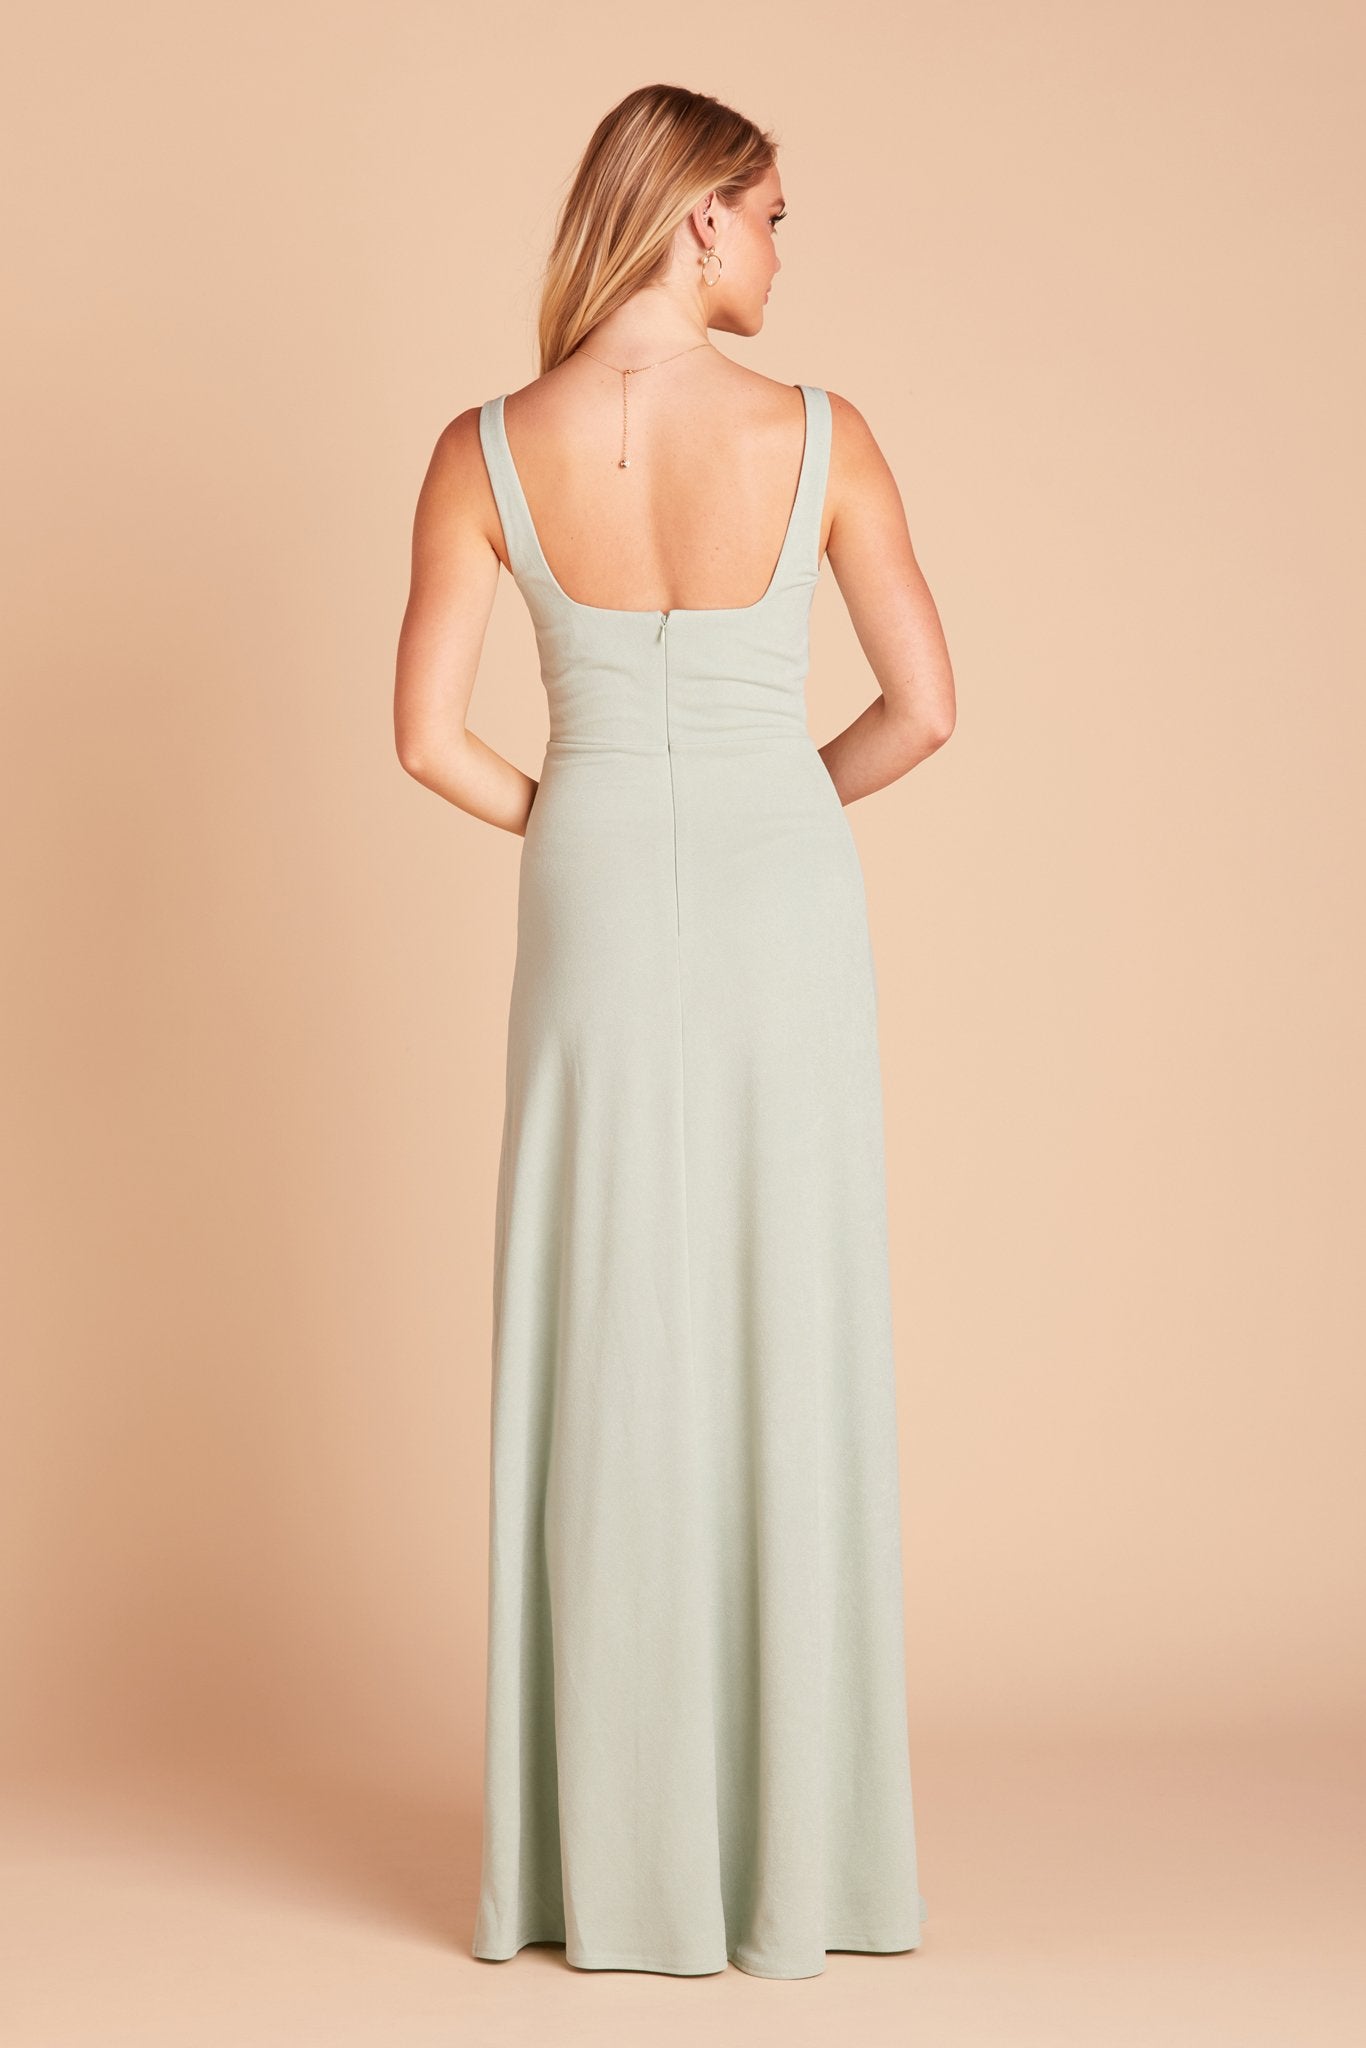 Back view of the Alex Convertible Bridesmaid Dress in crepe sage shows that the shoulder ties feature a square cut that falls just below the shoulder blades.